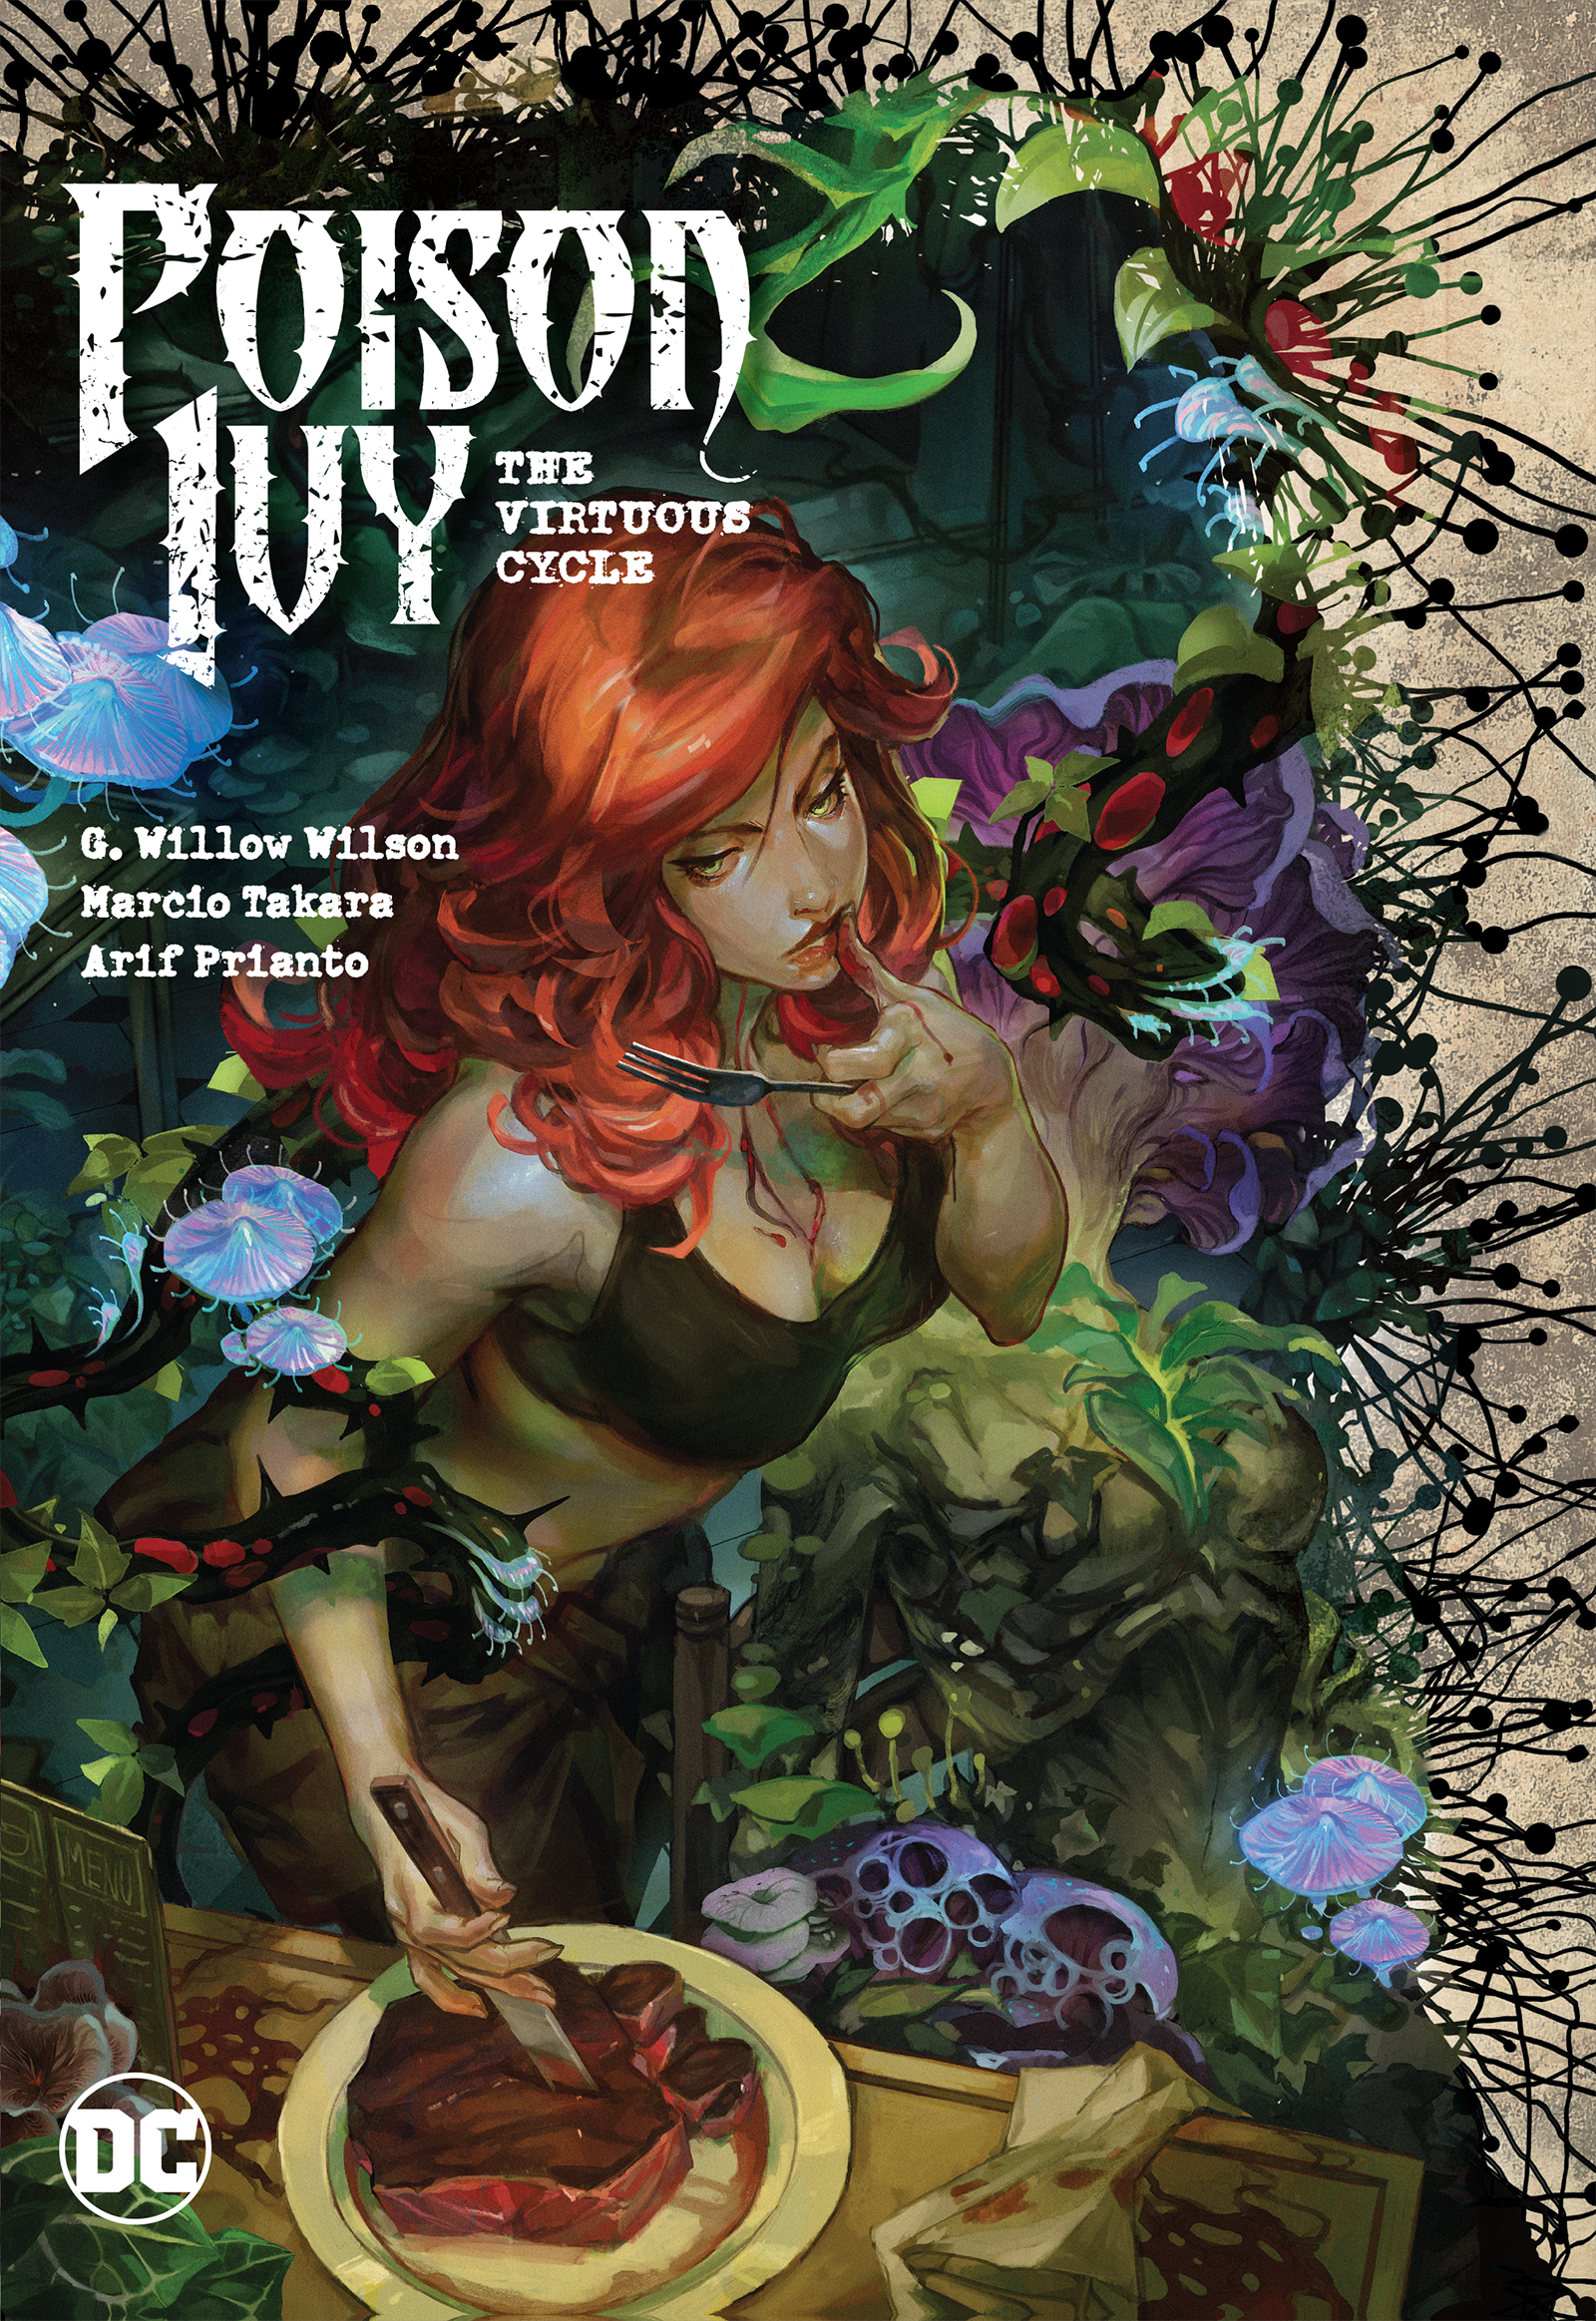 Poison Ivy Cutting Into a Steak on the A Cover of Poison Ivy: The Virtuous Cycle